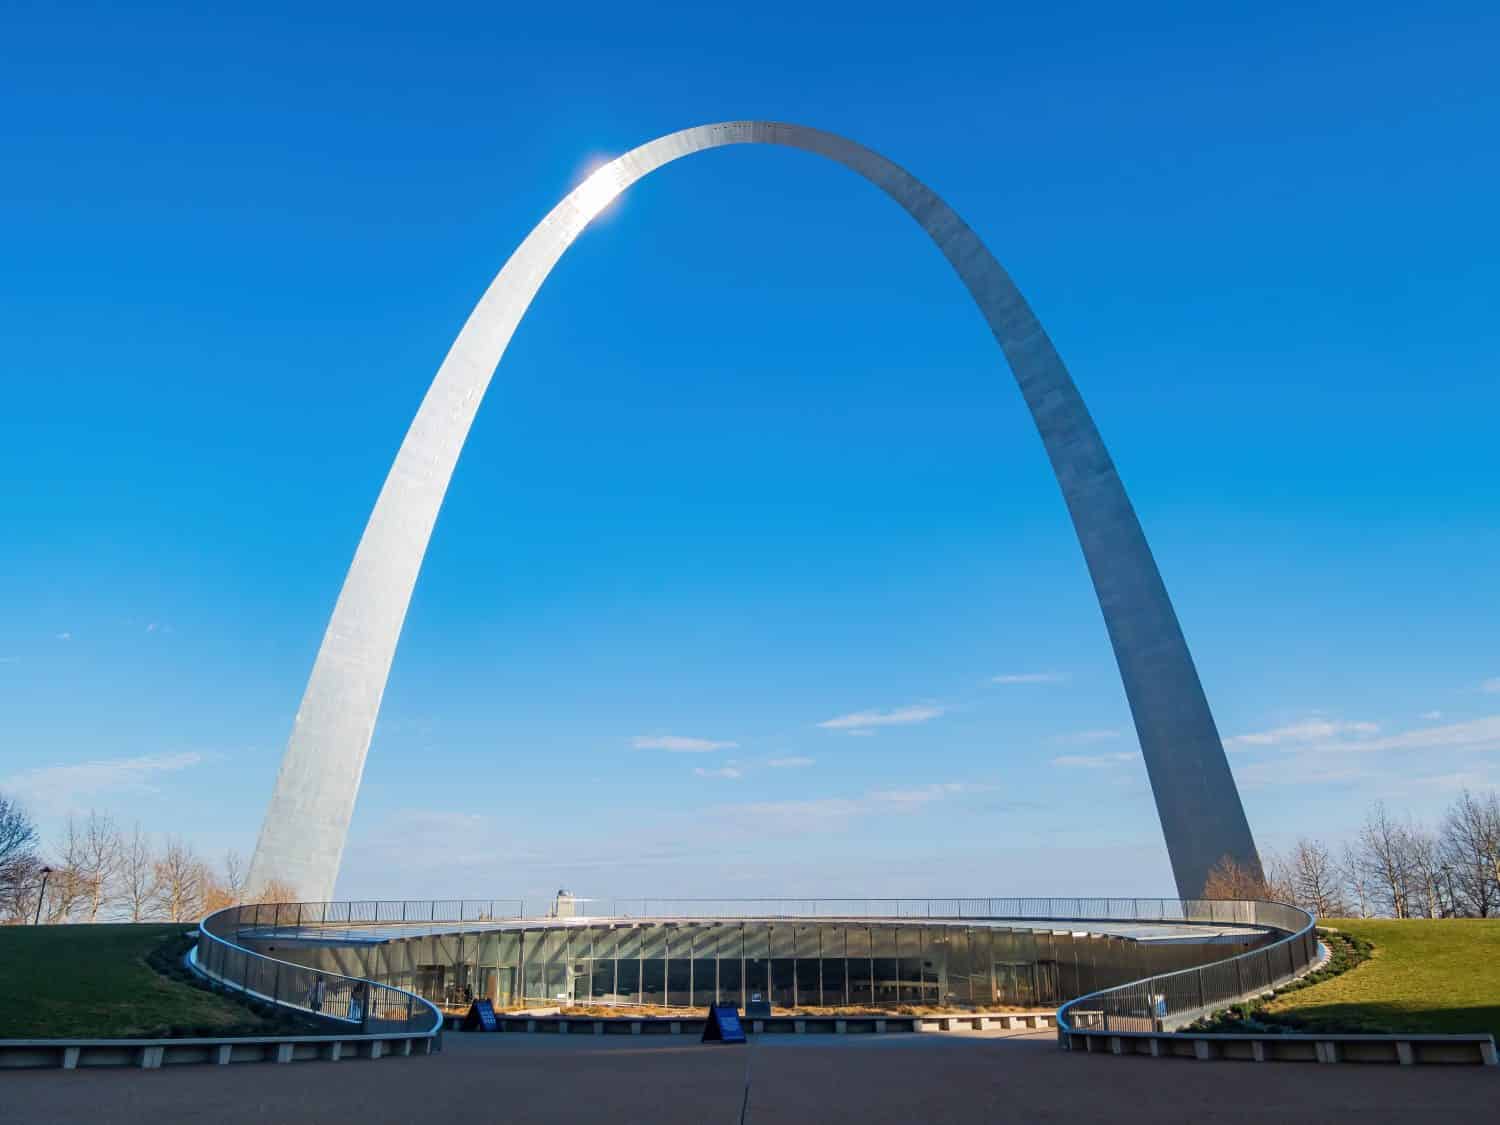 Sunny view of The Gateway Arch at Missouri